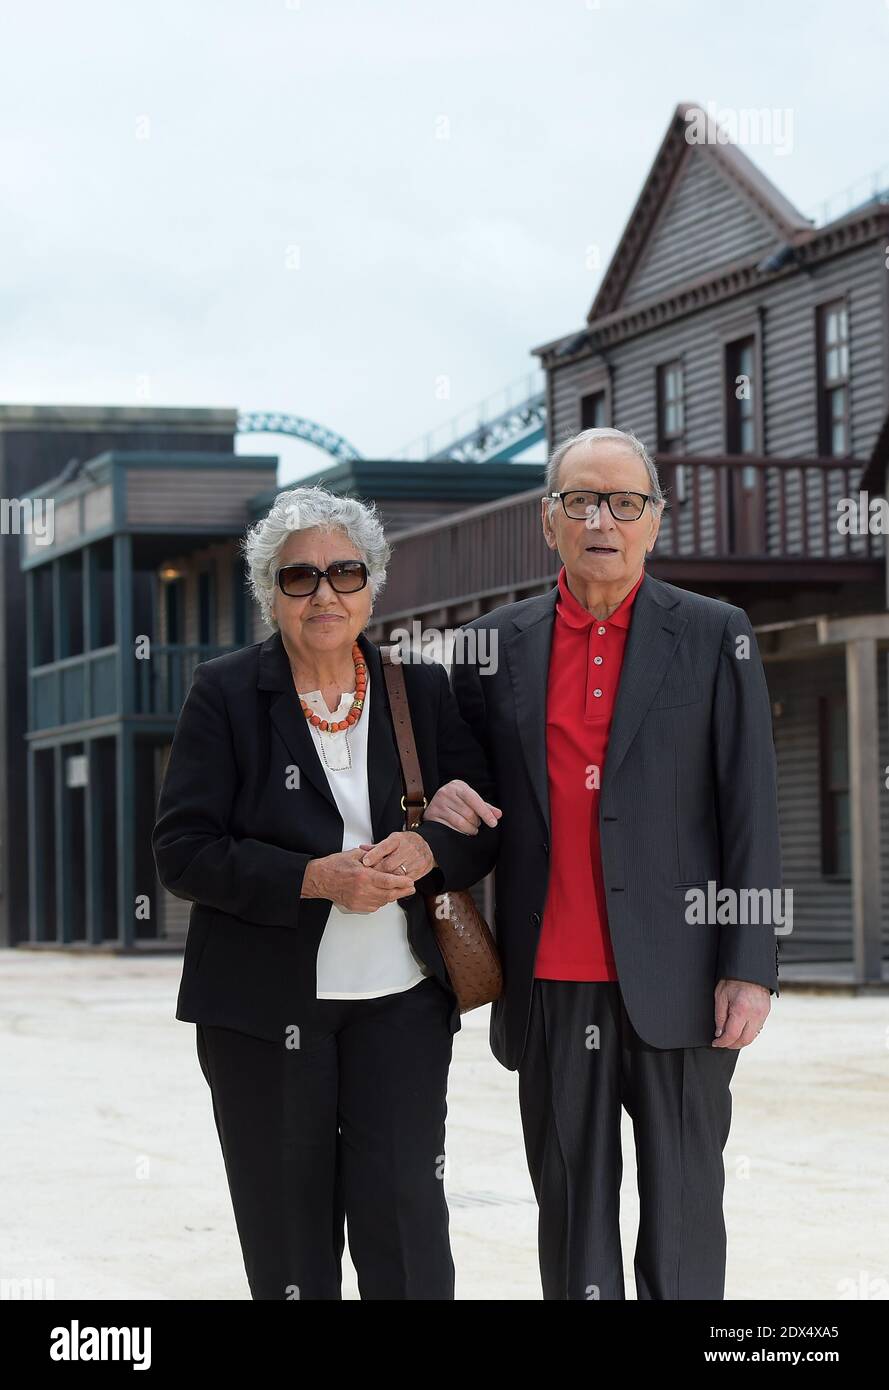 Italian composer and Oscar-winning Ennio Morricone and his wife Maria Tavia visit 'Cinecitta World', the new italian movie theme park unveiled in Rome, Italy on July 10, 2014. The ambient music of the western set of the park is by Ennio Morricone, winner of the Honorary Academy Award for career achievement in 2007 and to whom the theme park's Westerns section is dedicated. The look of Cinecitta World is a mix of sword and sandals epics, Fellinesque and Bollywood elements, including gigantic elephants, science fiction, spaghetti westerns and many other themes concocted by Dante Ferretti from th Stock Photo